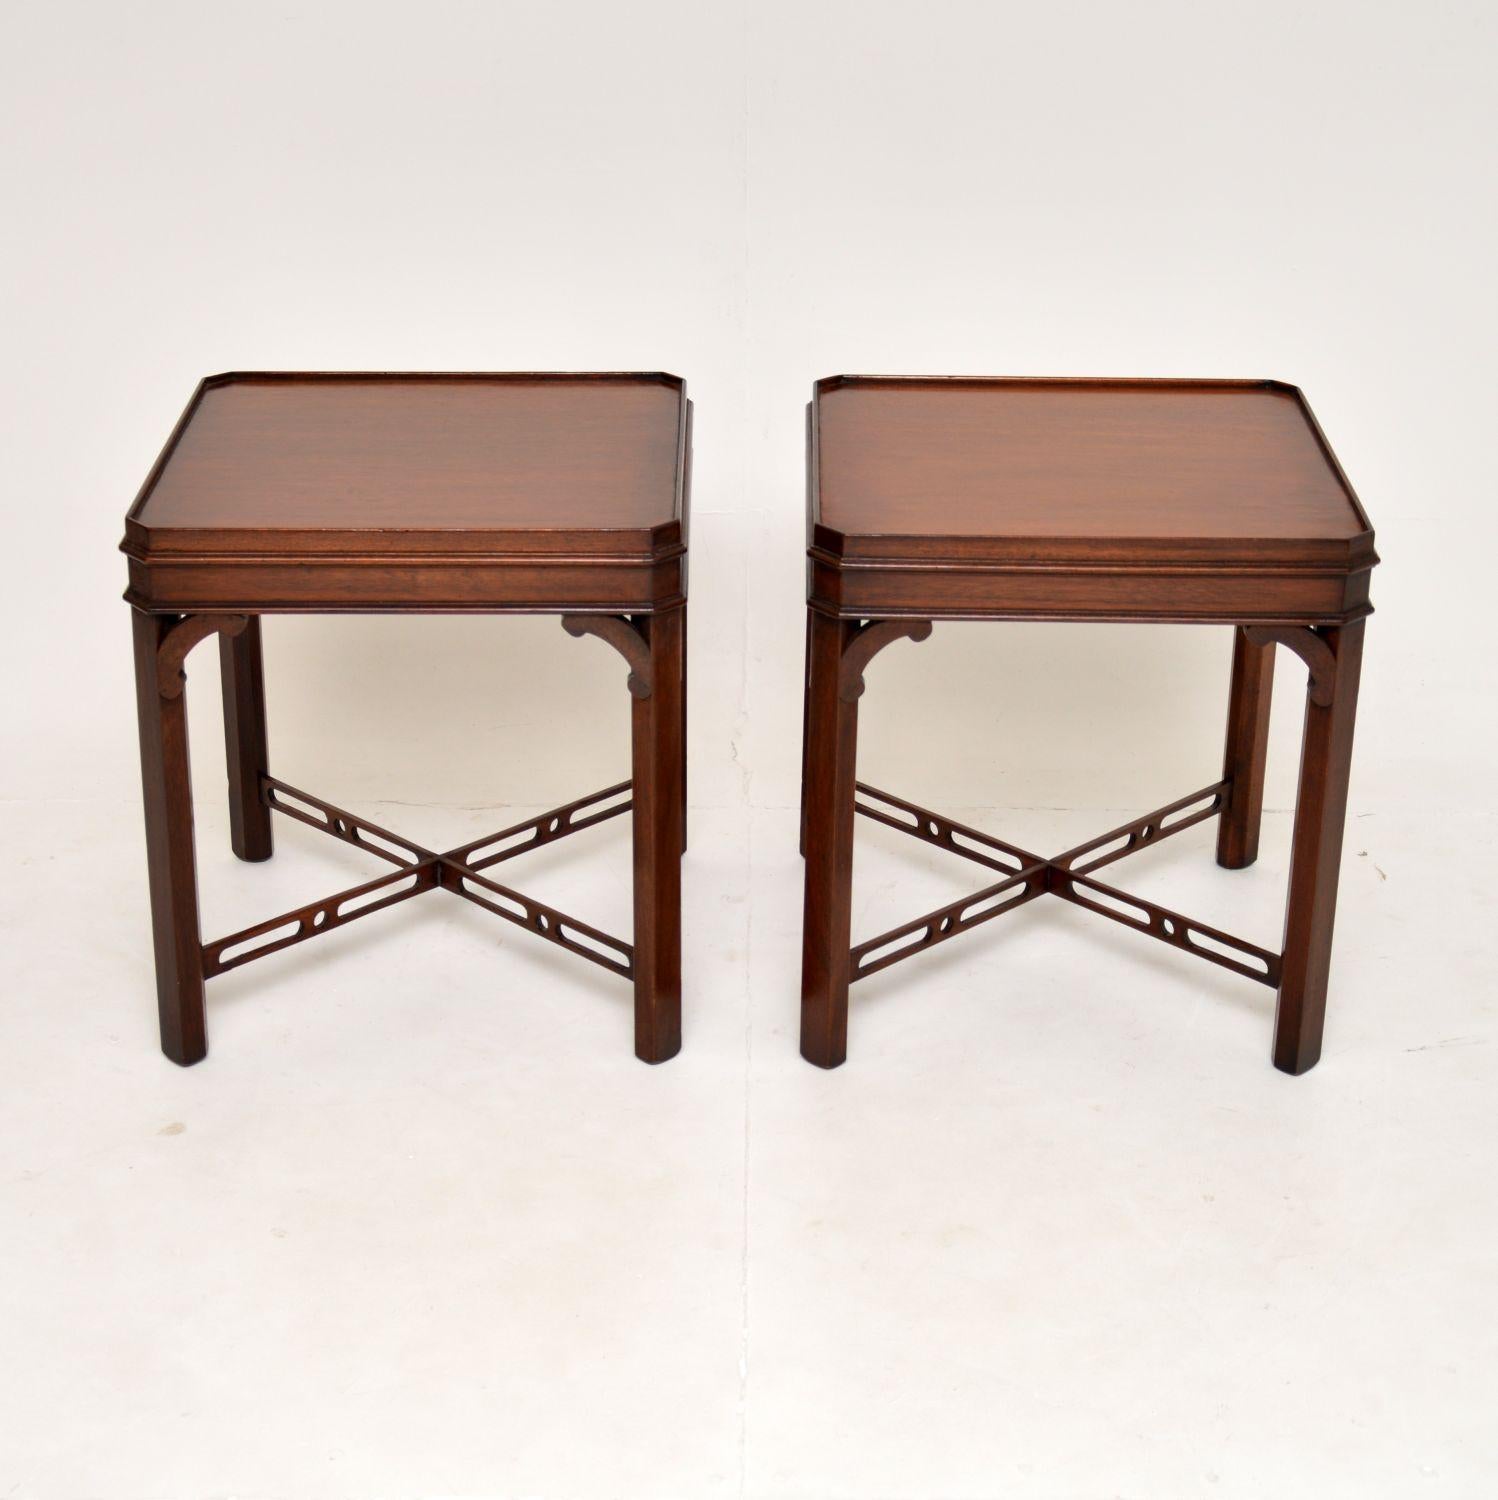 An excellent pair of antique side tables in the Chippendale style. They were made in England, they date from around the 1930’s.

The quality is superb, they are a very useful size and have a beautiful design. The tops have canted corners with